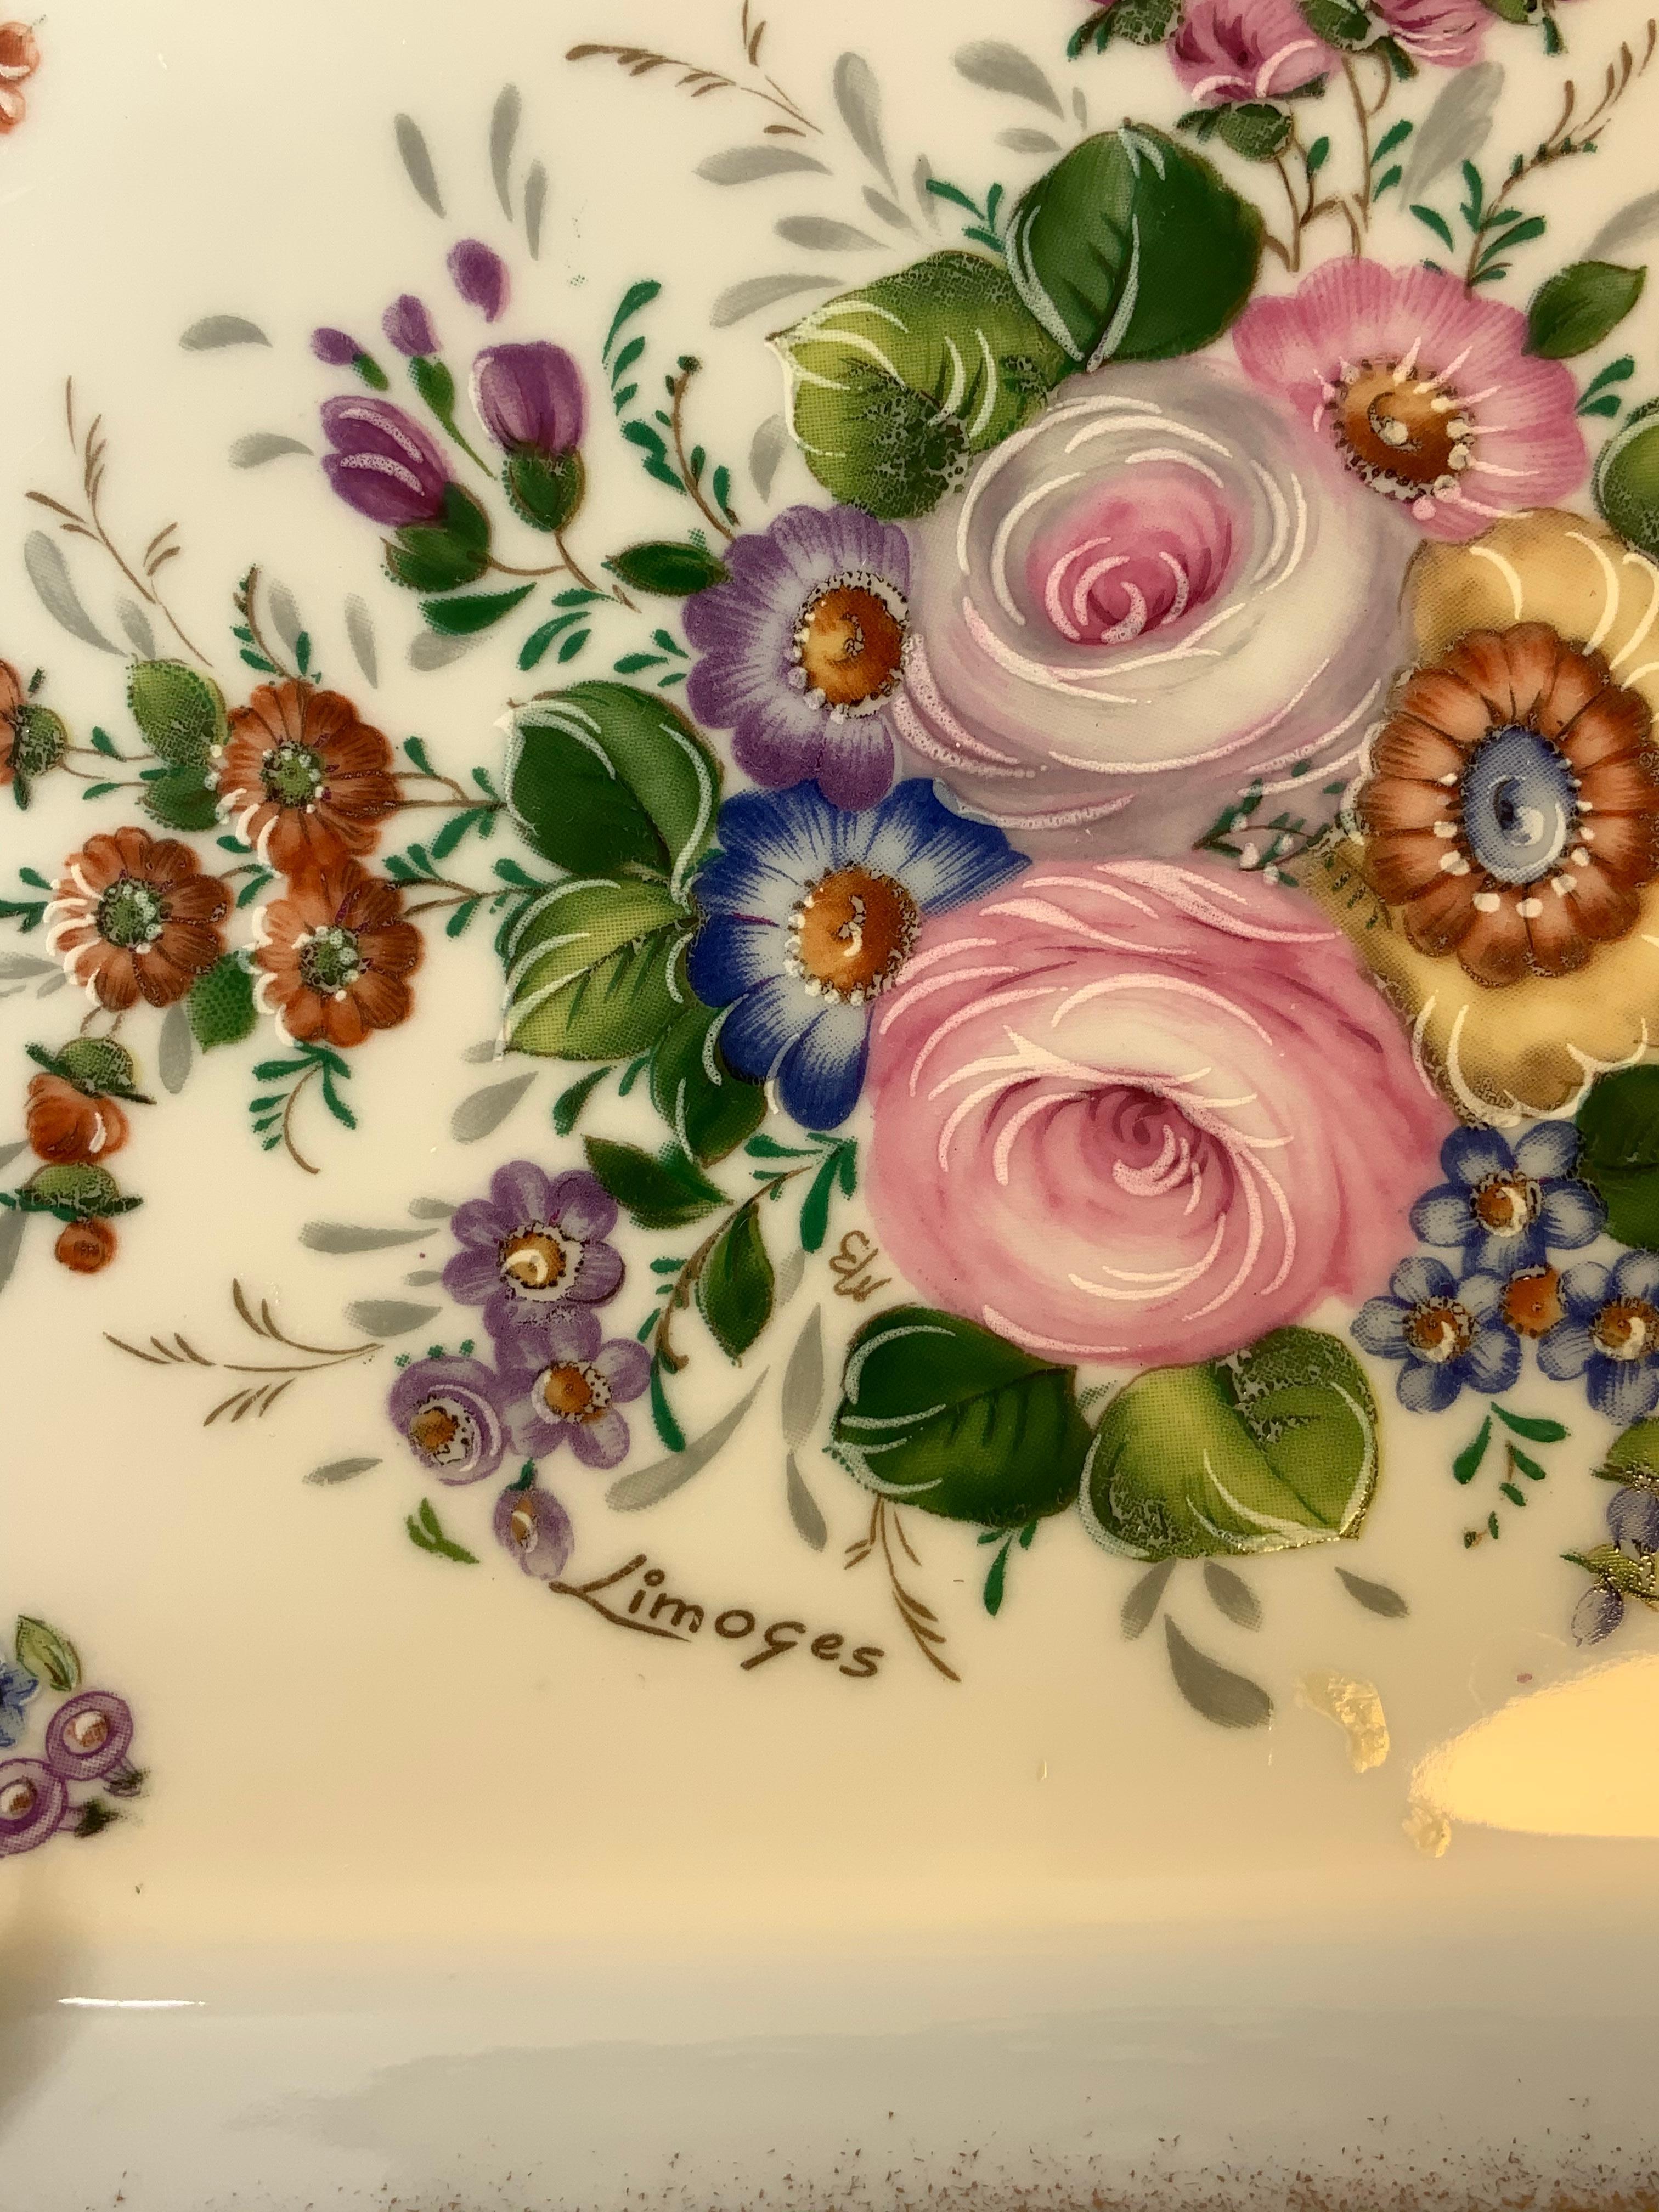 An octagonal bronze mounted porcelain dresser tray. It is hand painted with a bouquet of flowers & foliage in its center against a white background. The gilded borderline of the tray is framed by a patinated bronze border decorated with a ribbon